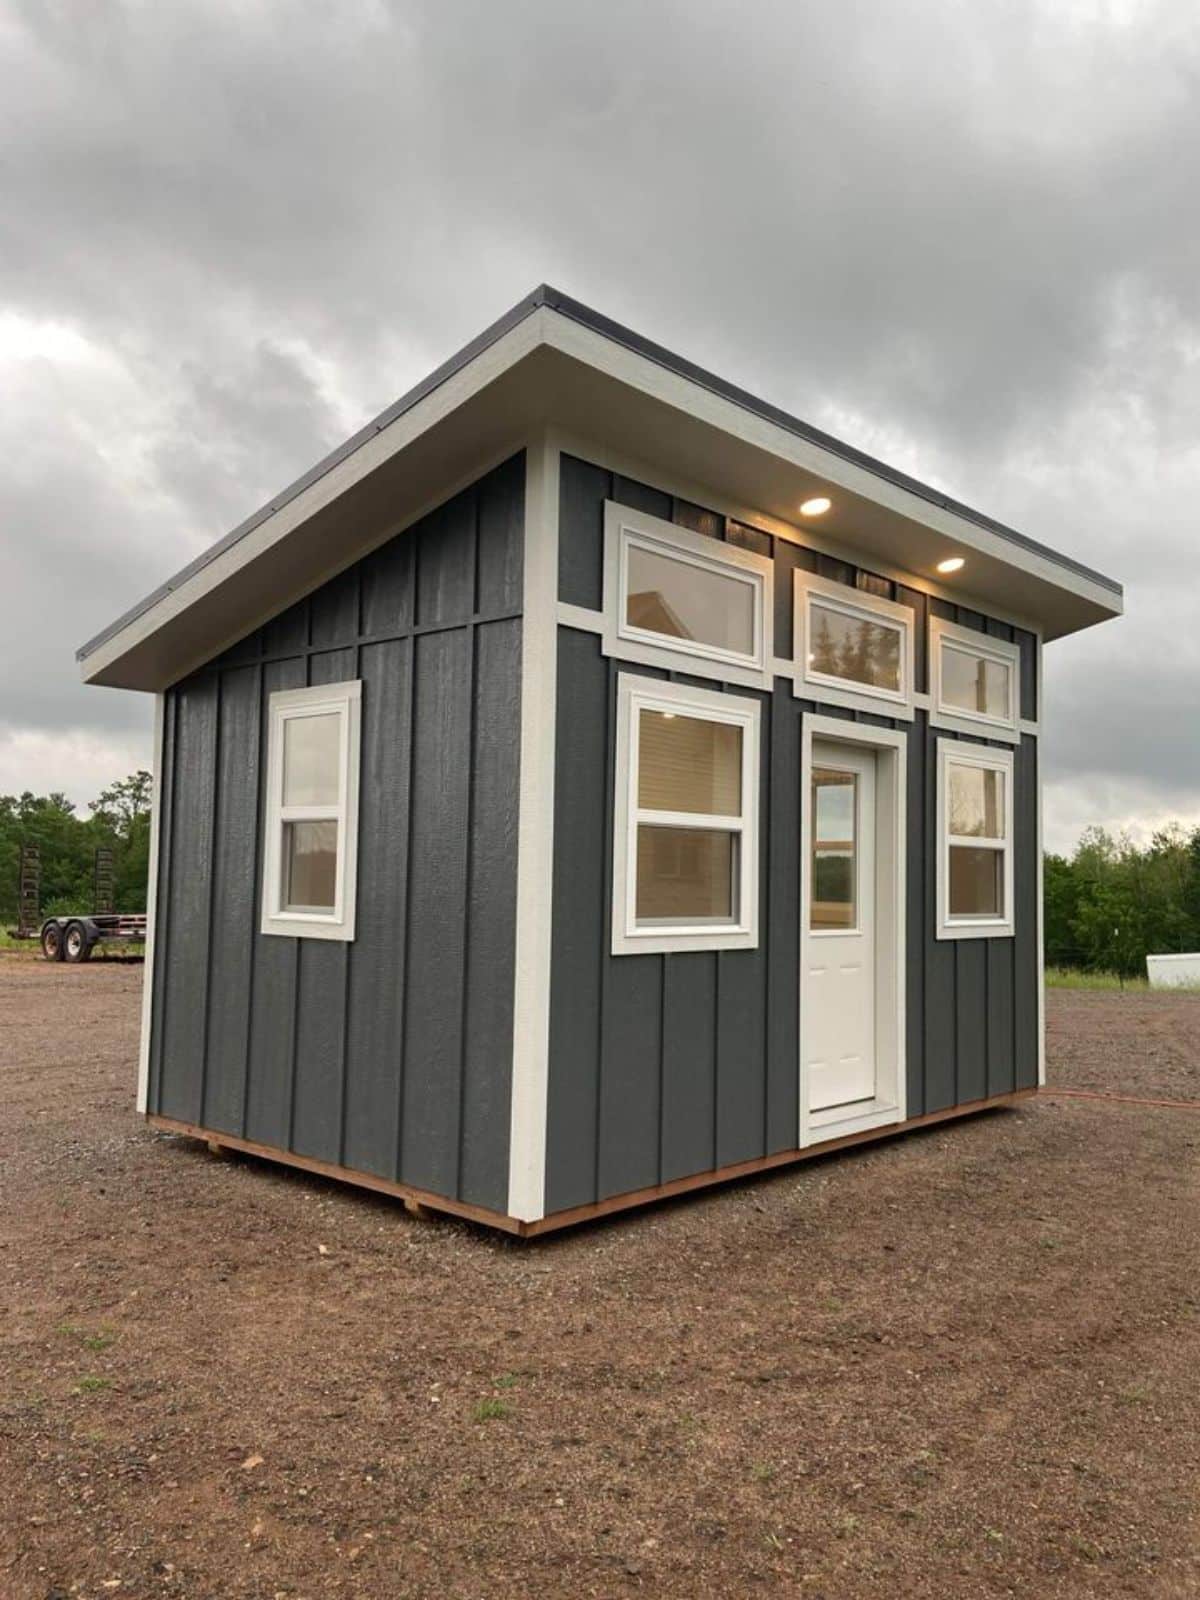 Compact but stunning exterior of 16’ Tiny Office/Studio